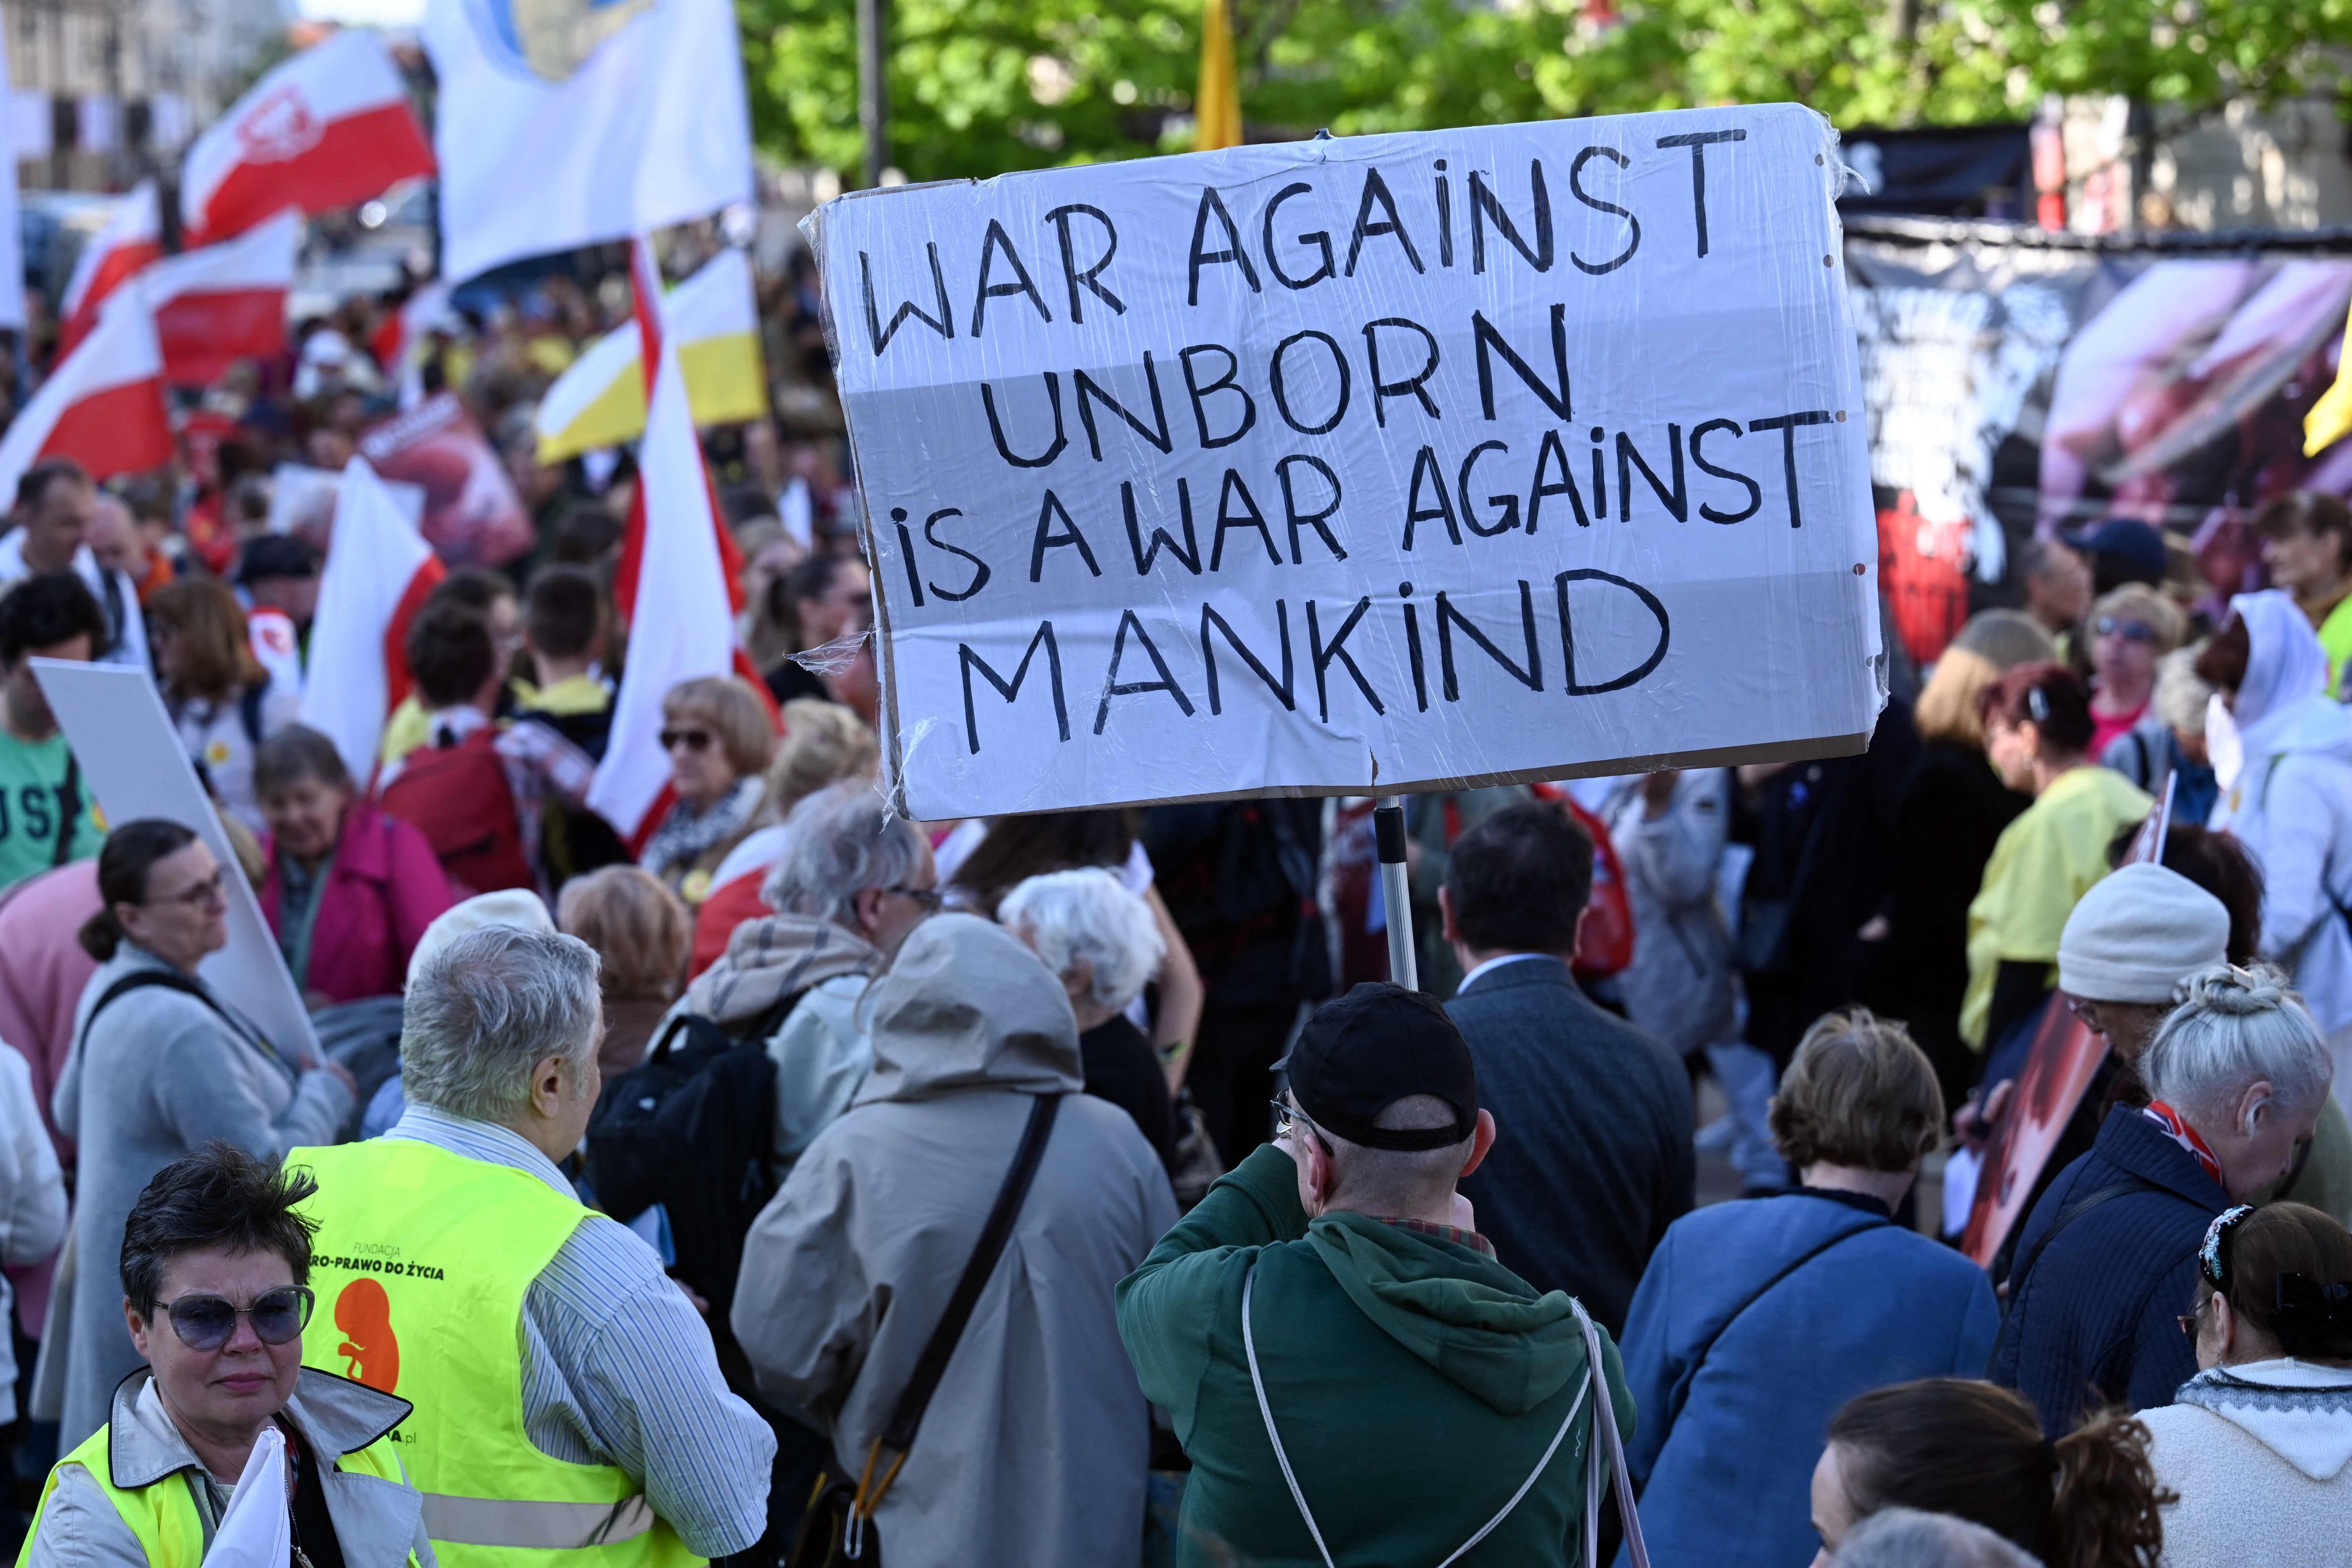 Anti-abortionists in the March for Children in Warsaw. The party of centrist Prime Minister Donald Tusk is seeking to change the law to allow women to terminate pregnancies up to the 12th week of pregnancy. Photo: AFP